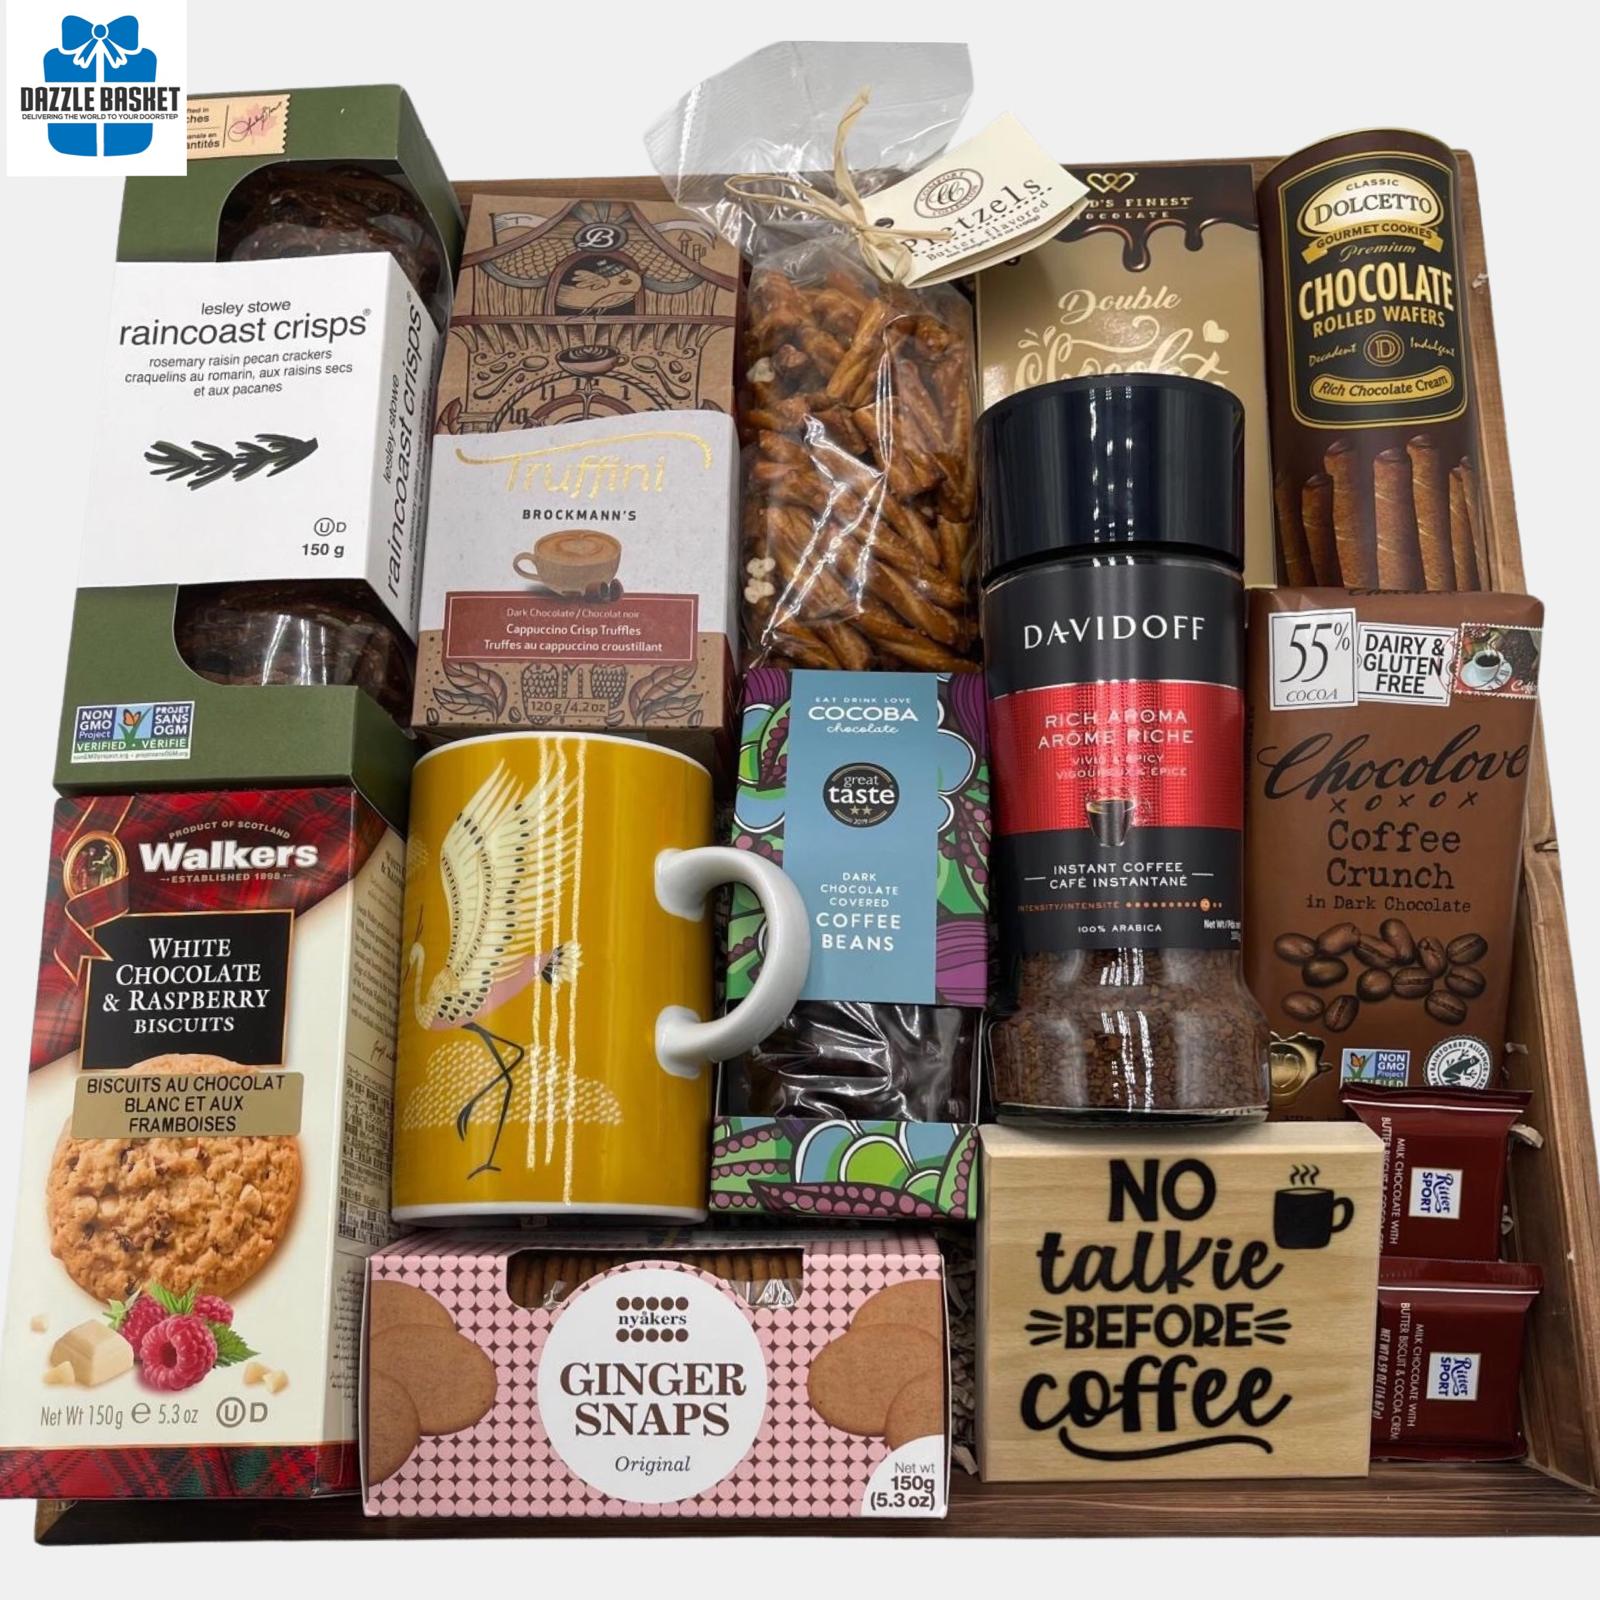 Coffee gift basket Calgary from Dazzle Basket - Perfect gift Calgary for a coffee lover. It has great gourmet snacks that can be savored over a coffee